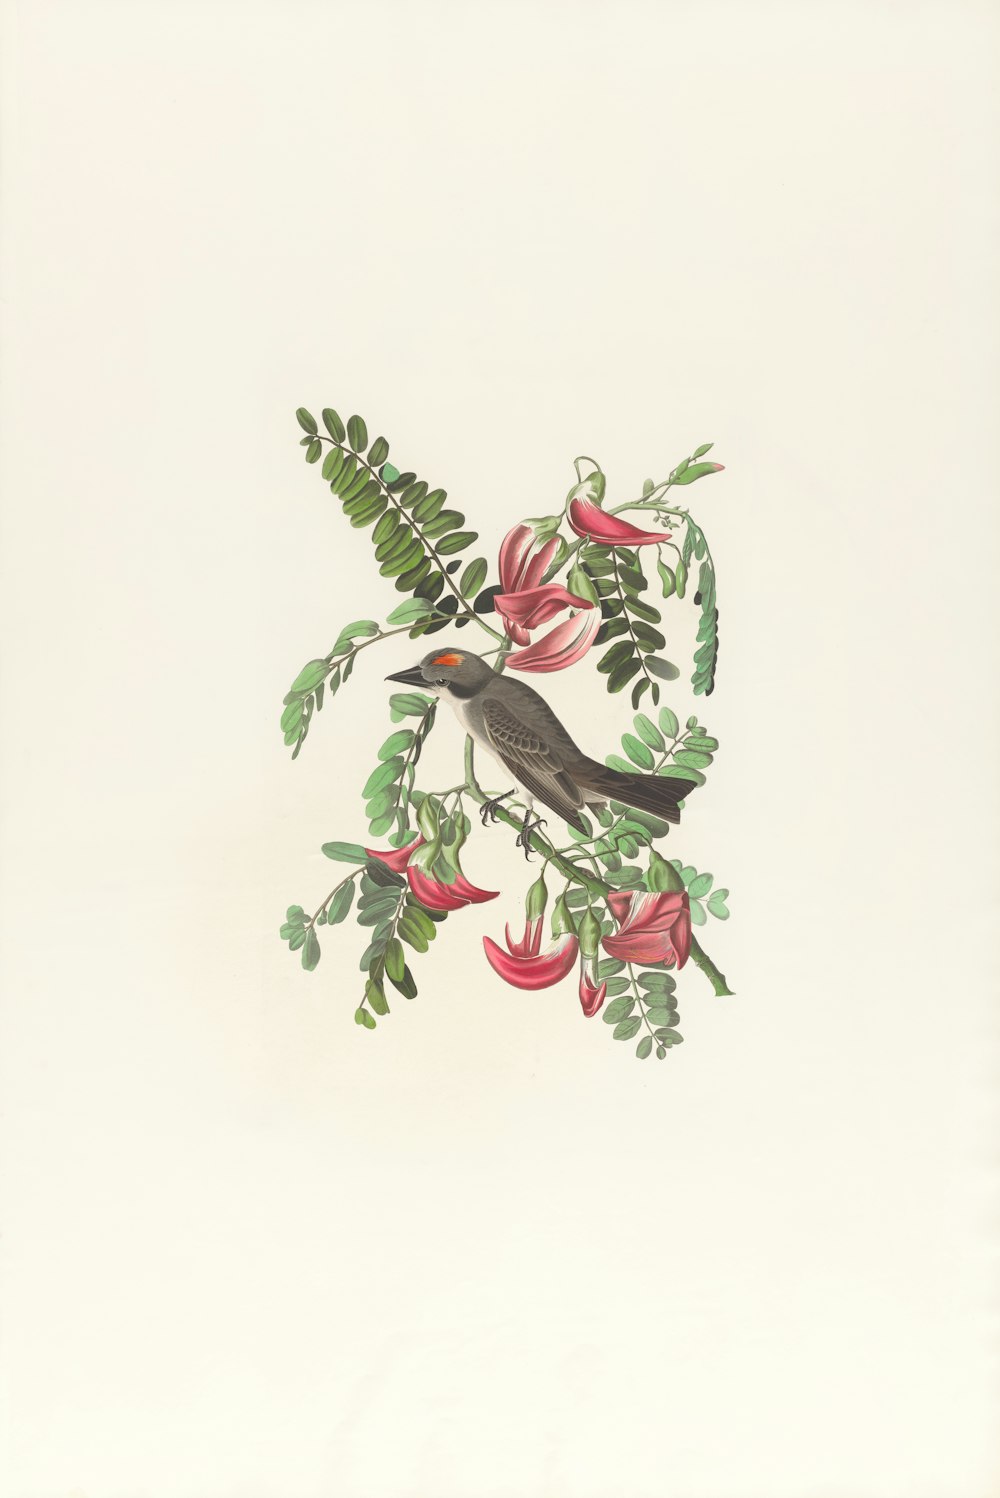 a drawing of a bird sitting on a branch with flowers